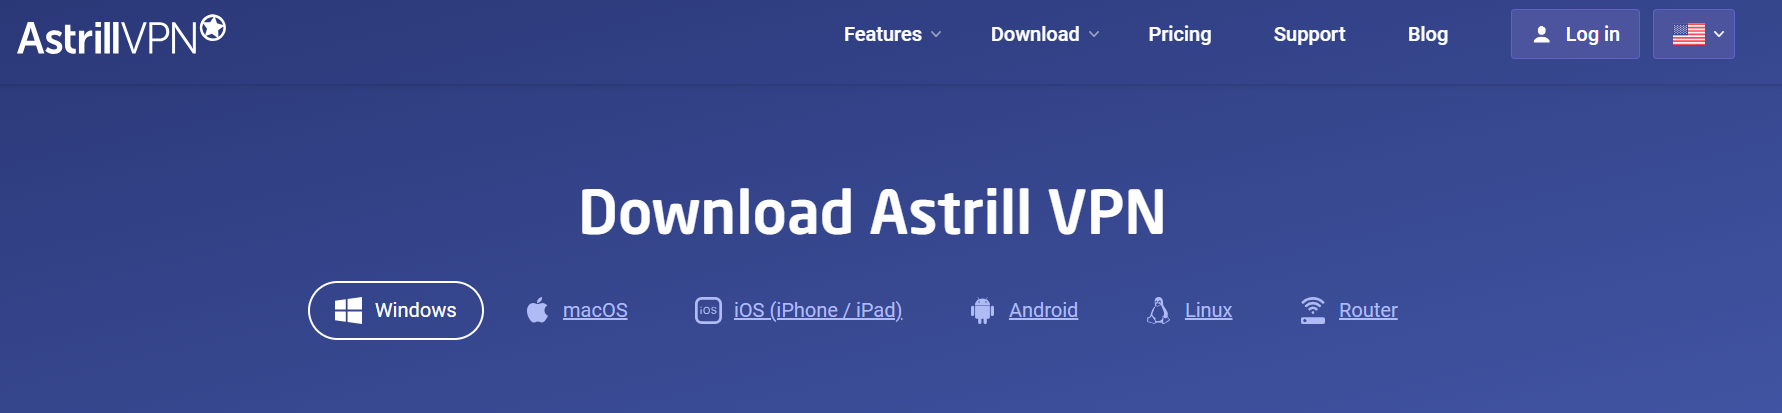 AstrillVPN directly 